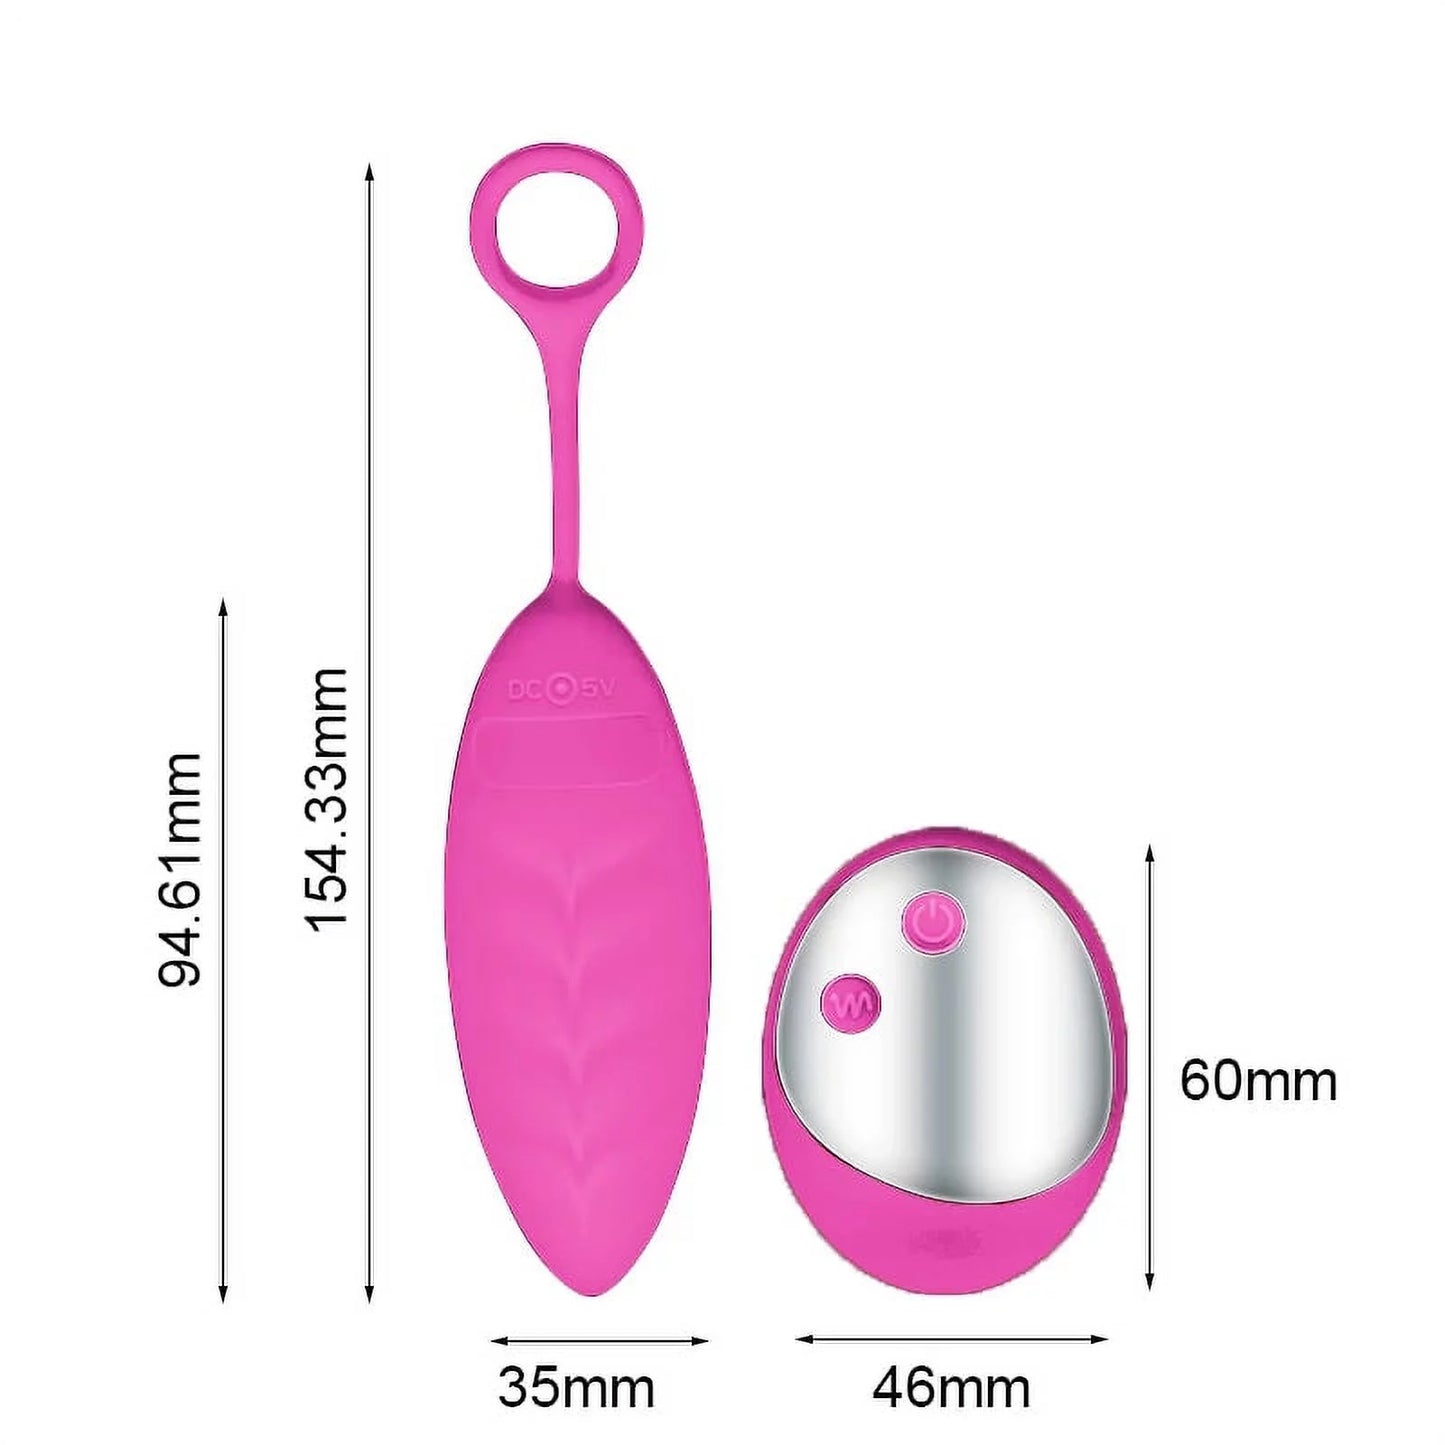 Remote Control Vibrating Silicone Egg USB Rechargeable (Pink)